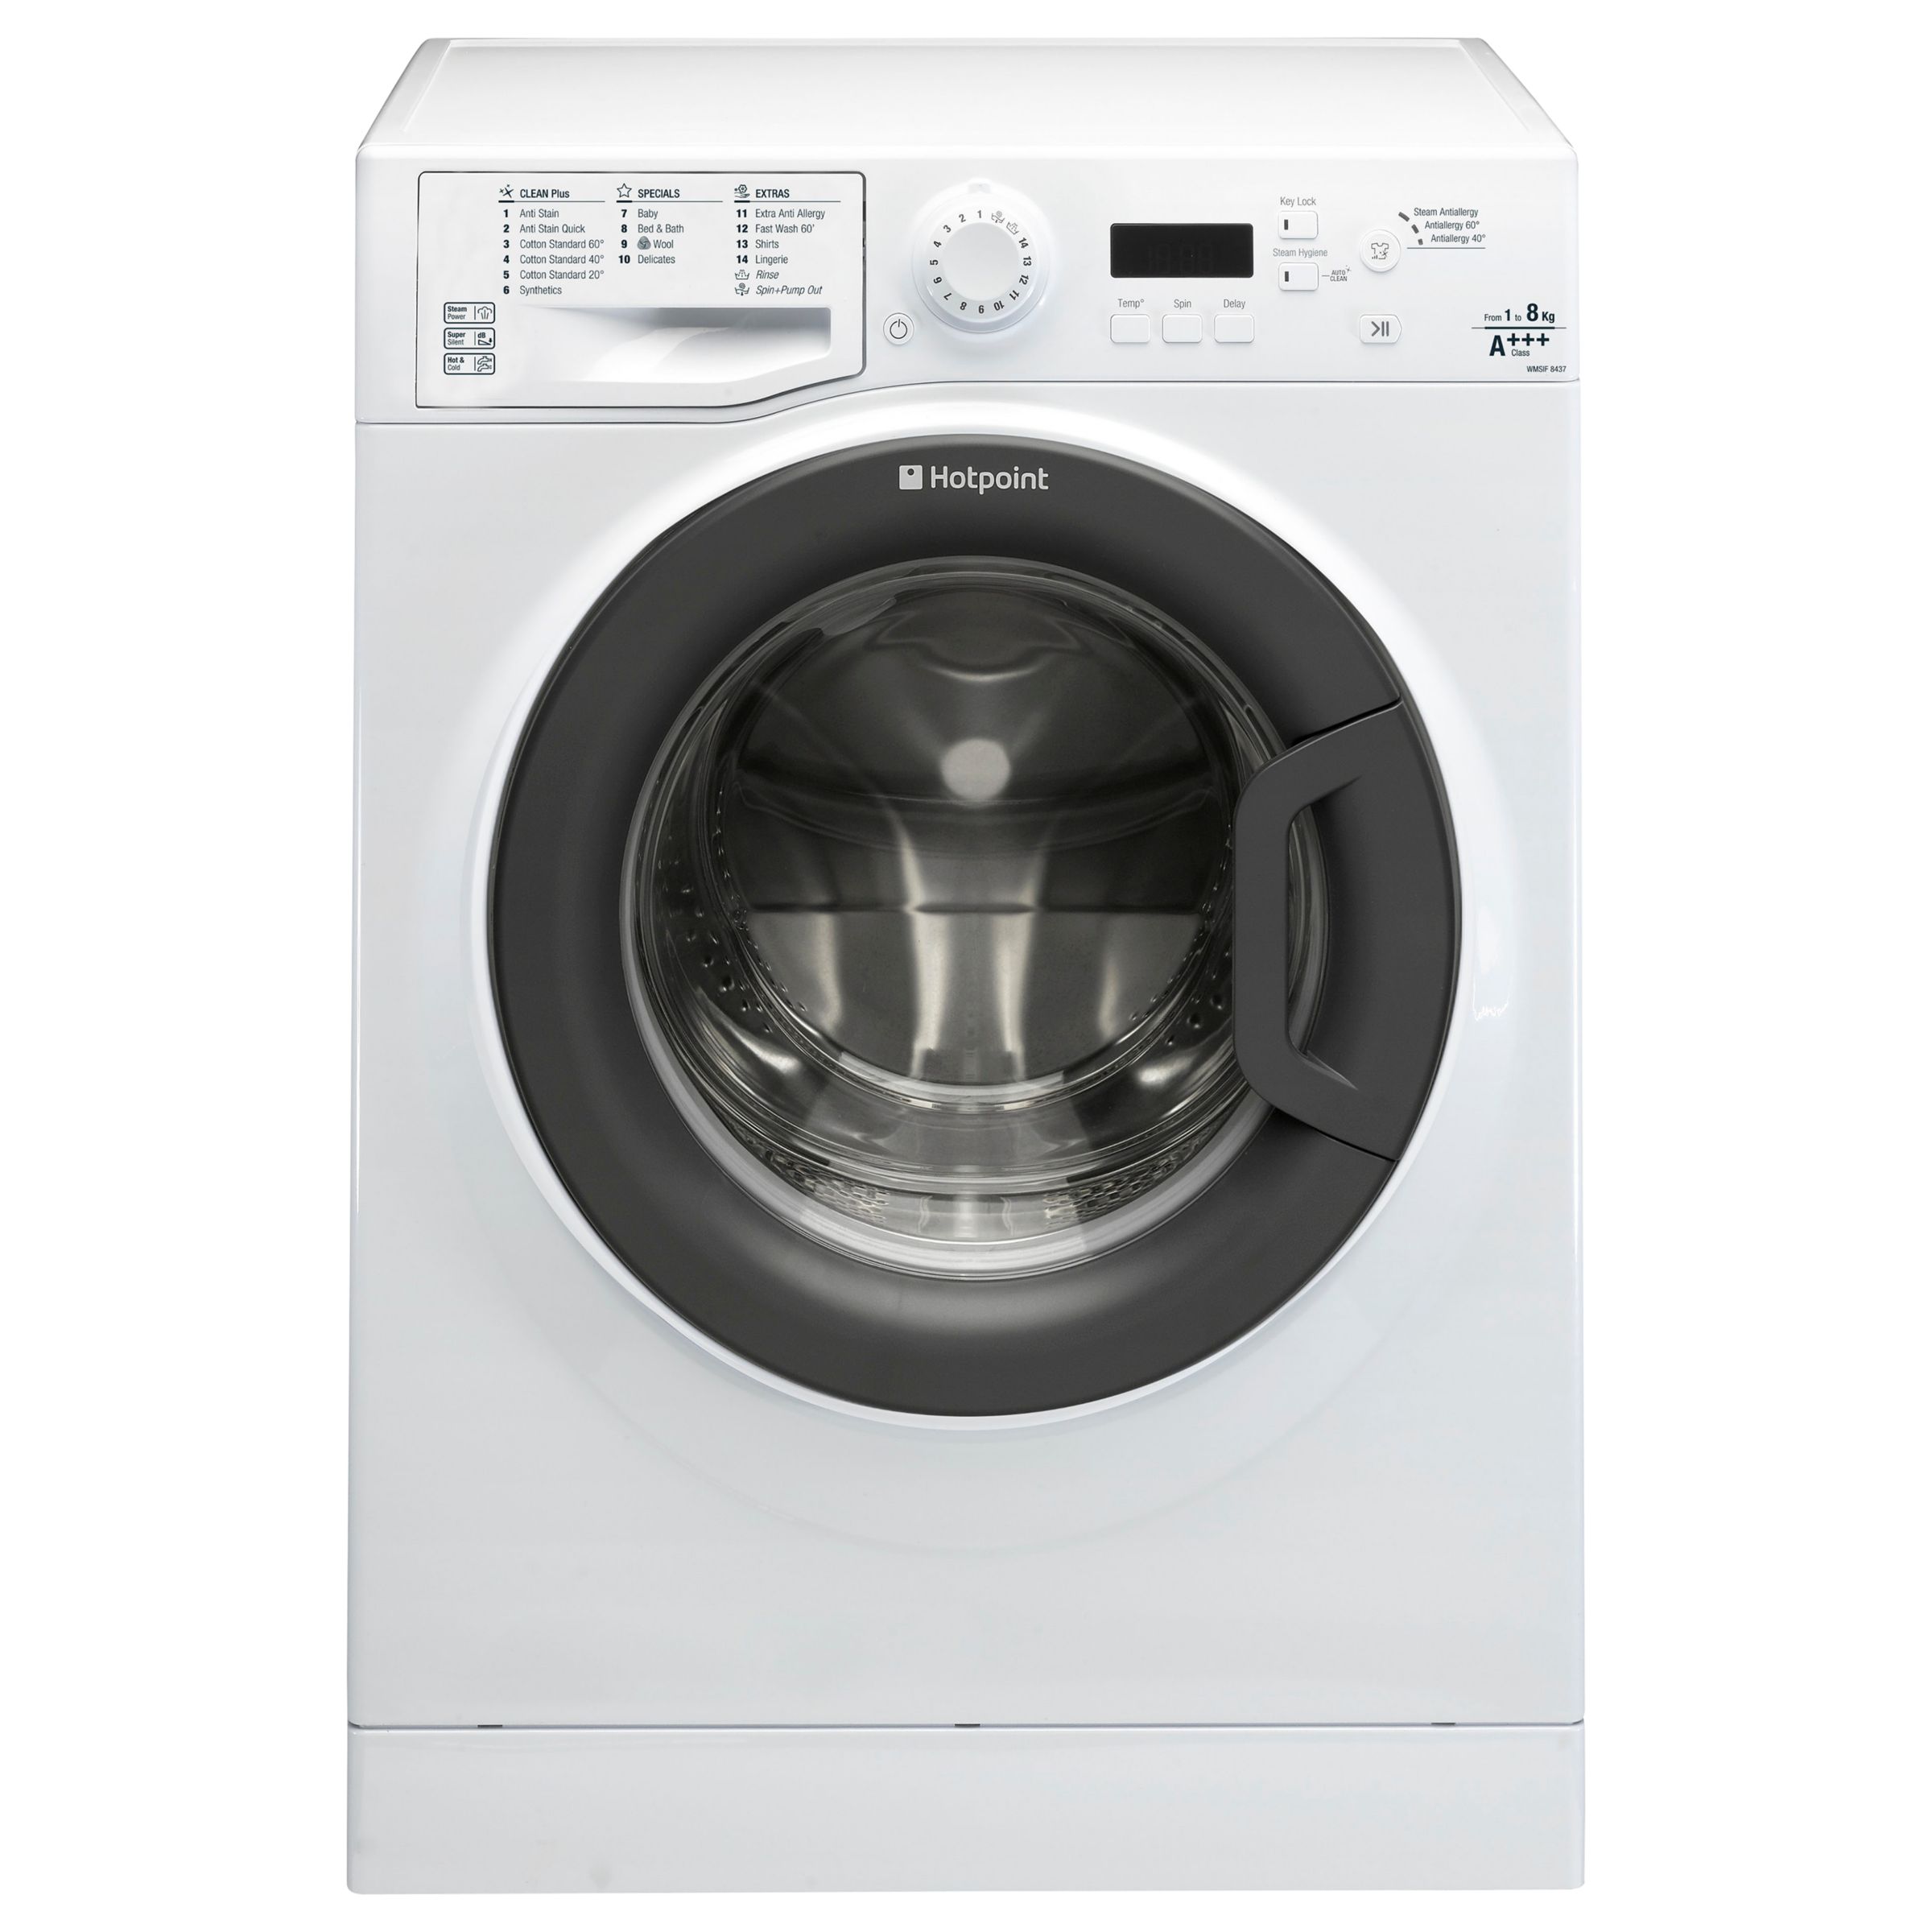 Hotpoint Signature WMSIF8437BC Freestanding Washing Machine, 8kg Load, A+++ Energy Rating, 1400rpm Spin in White